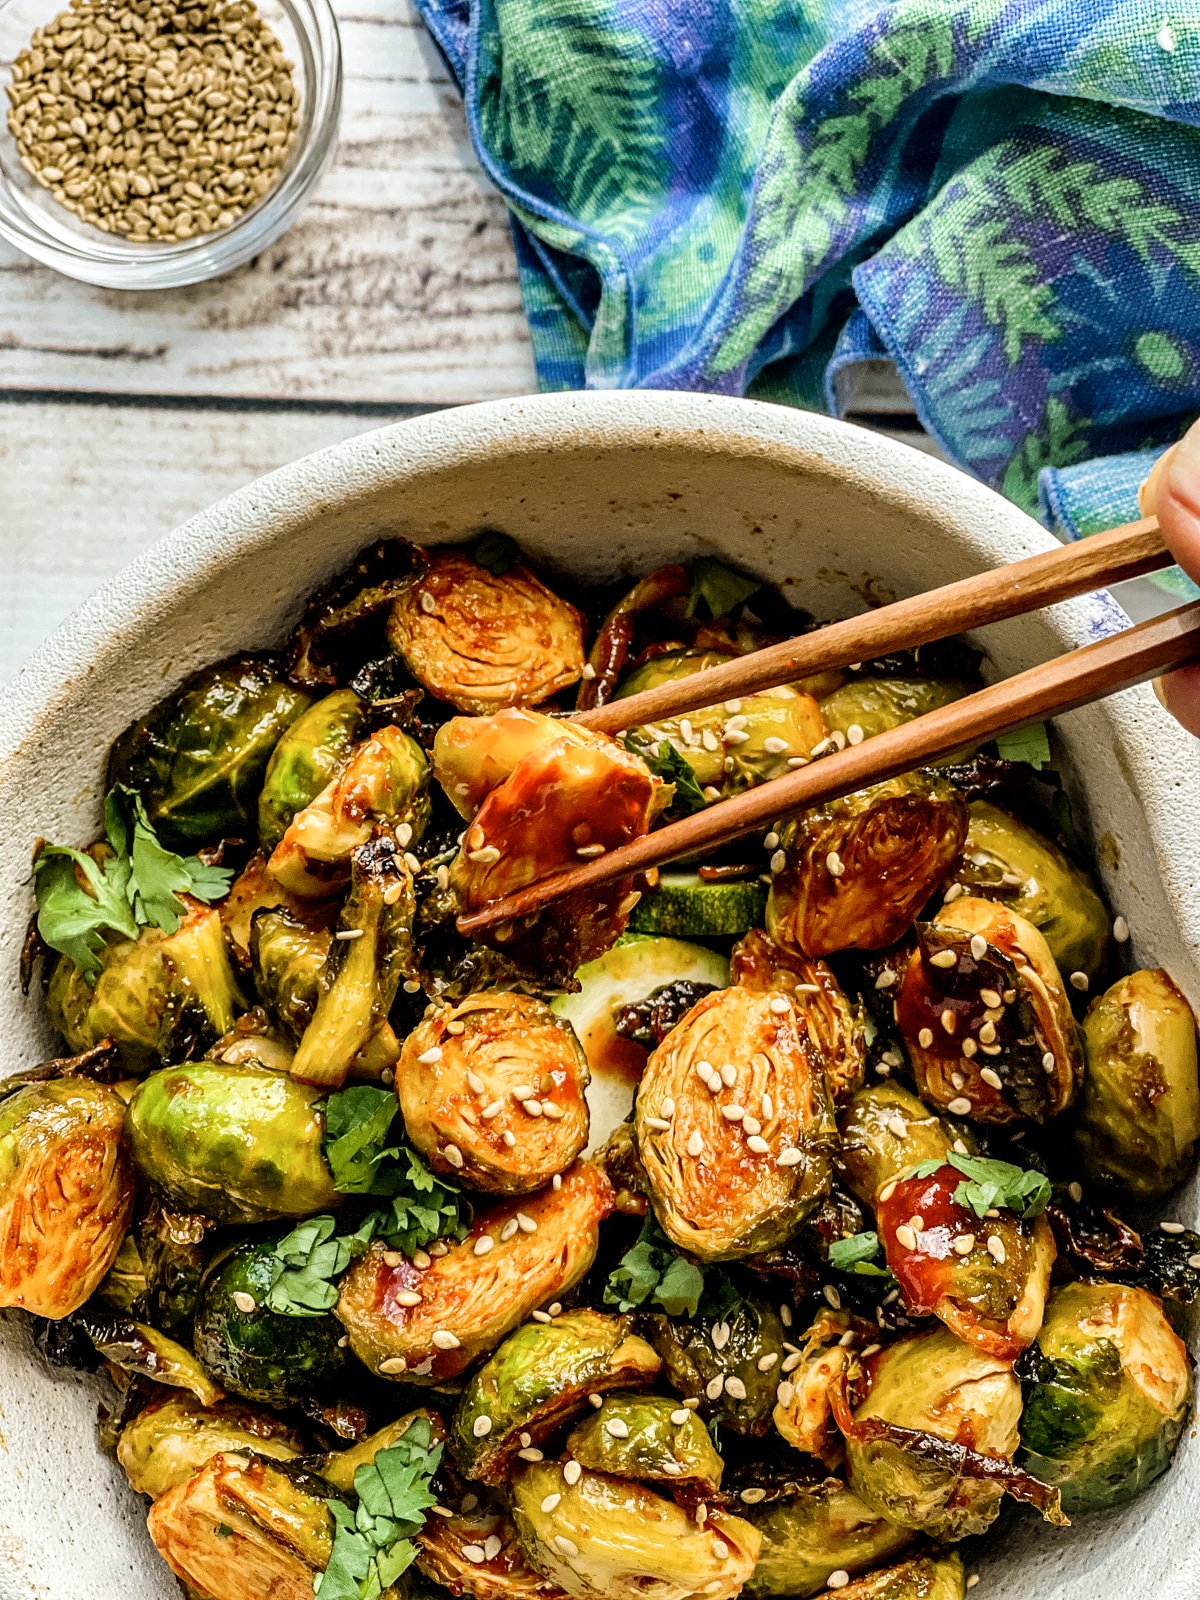 Chopsticks lifting up roasted brussels sprouts with gochujang sauce from a white bowl, with a blue napkin on the side.